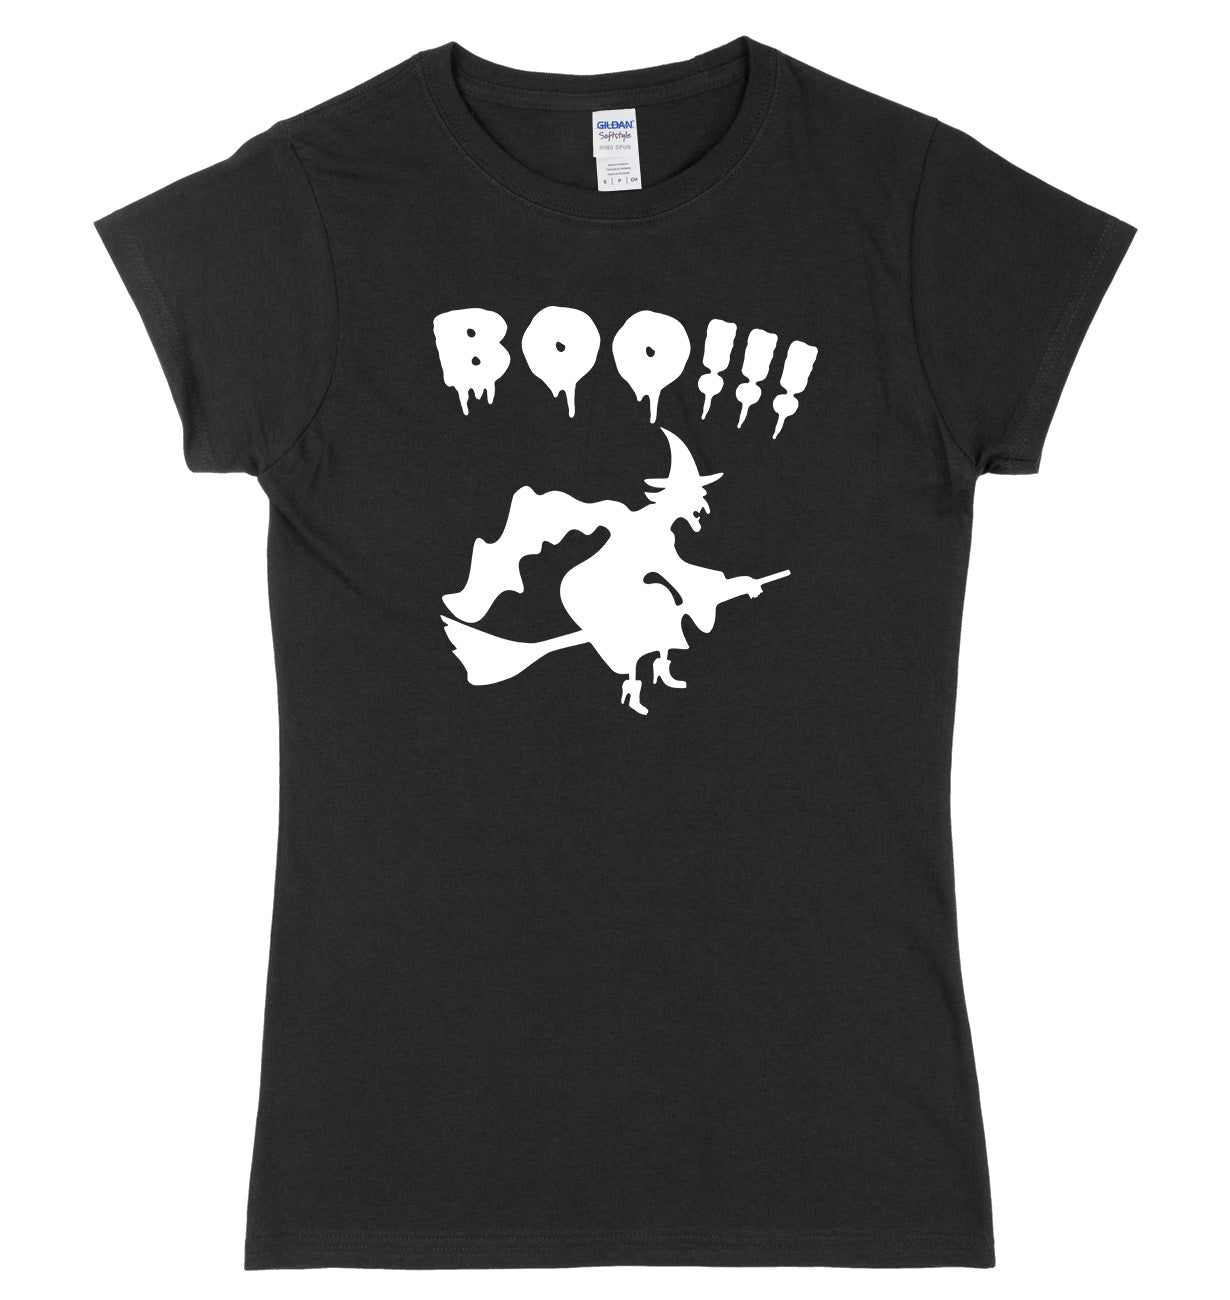 BOO!! Witch Flying A Broomstick Womens Ladies Slim Fit Halloween T-Shirt